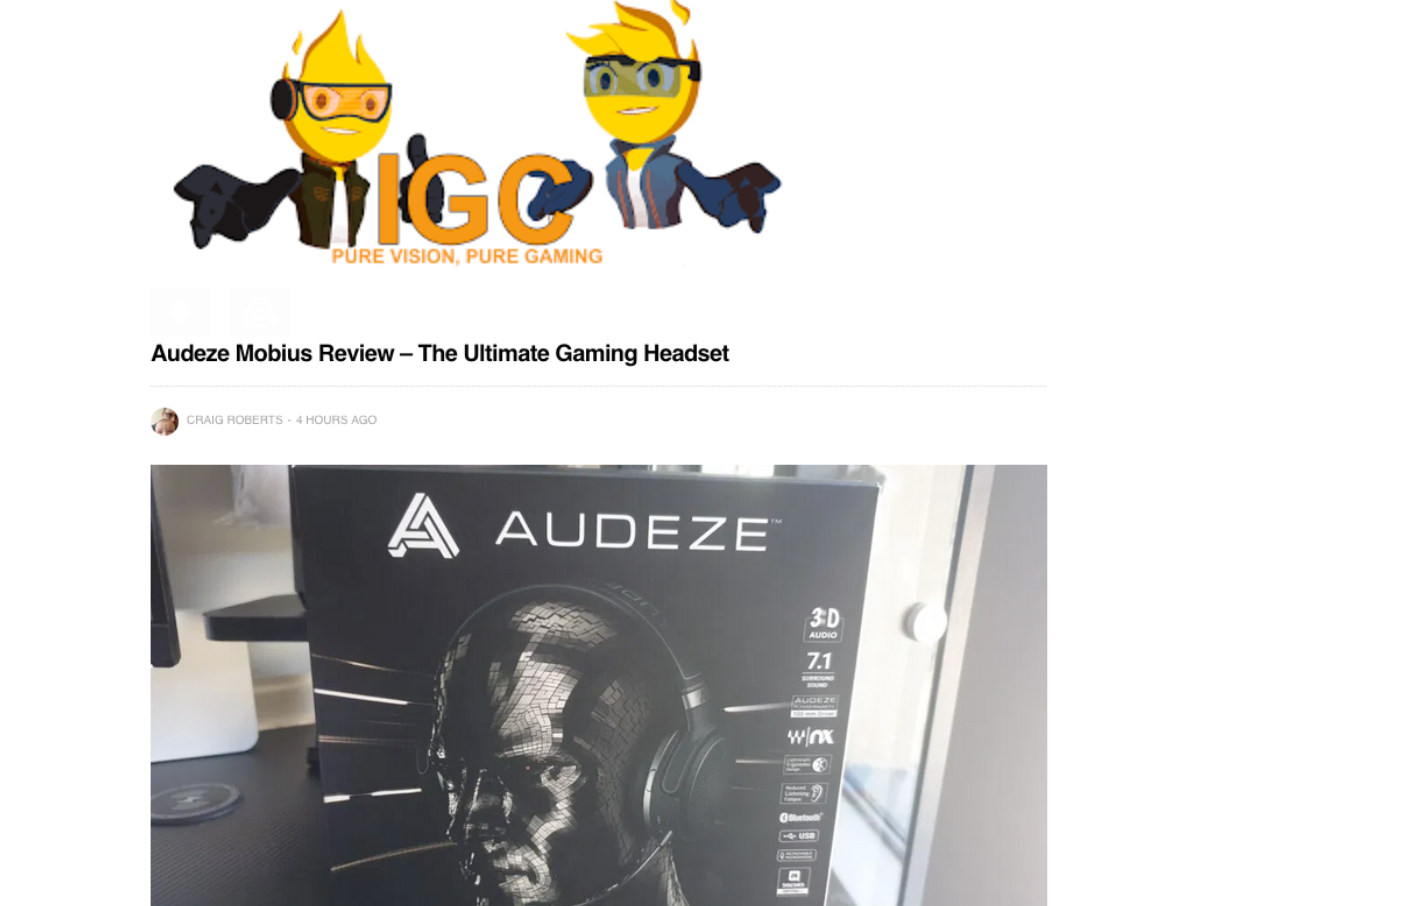 "The best gaming headset I have ever had the opportunity to own and review" says IGC of Audeze Mobius